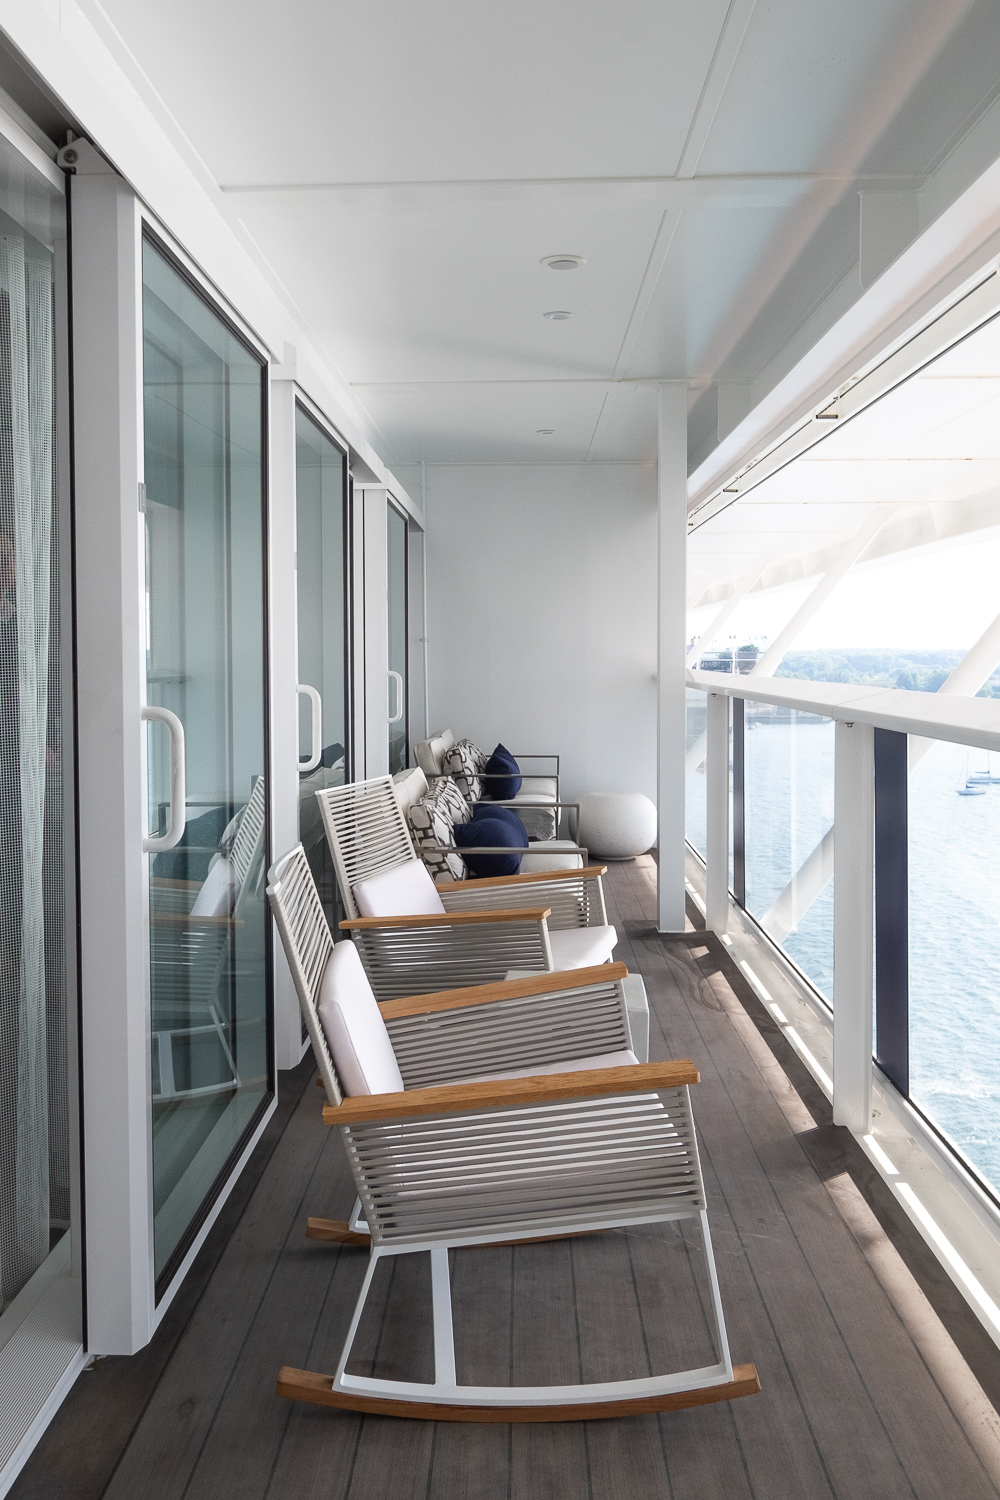 Balcony in one of the penthouse suites | 12 reasons to choose Celebrity Edge for your next cruise | Mondomulia